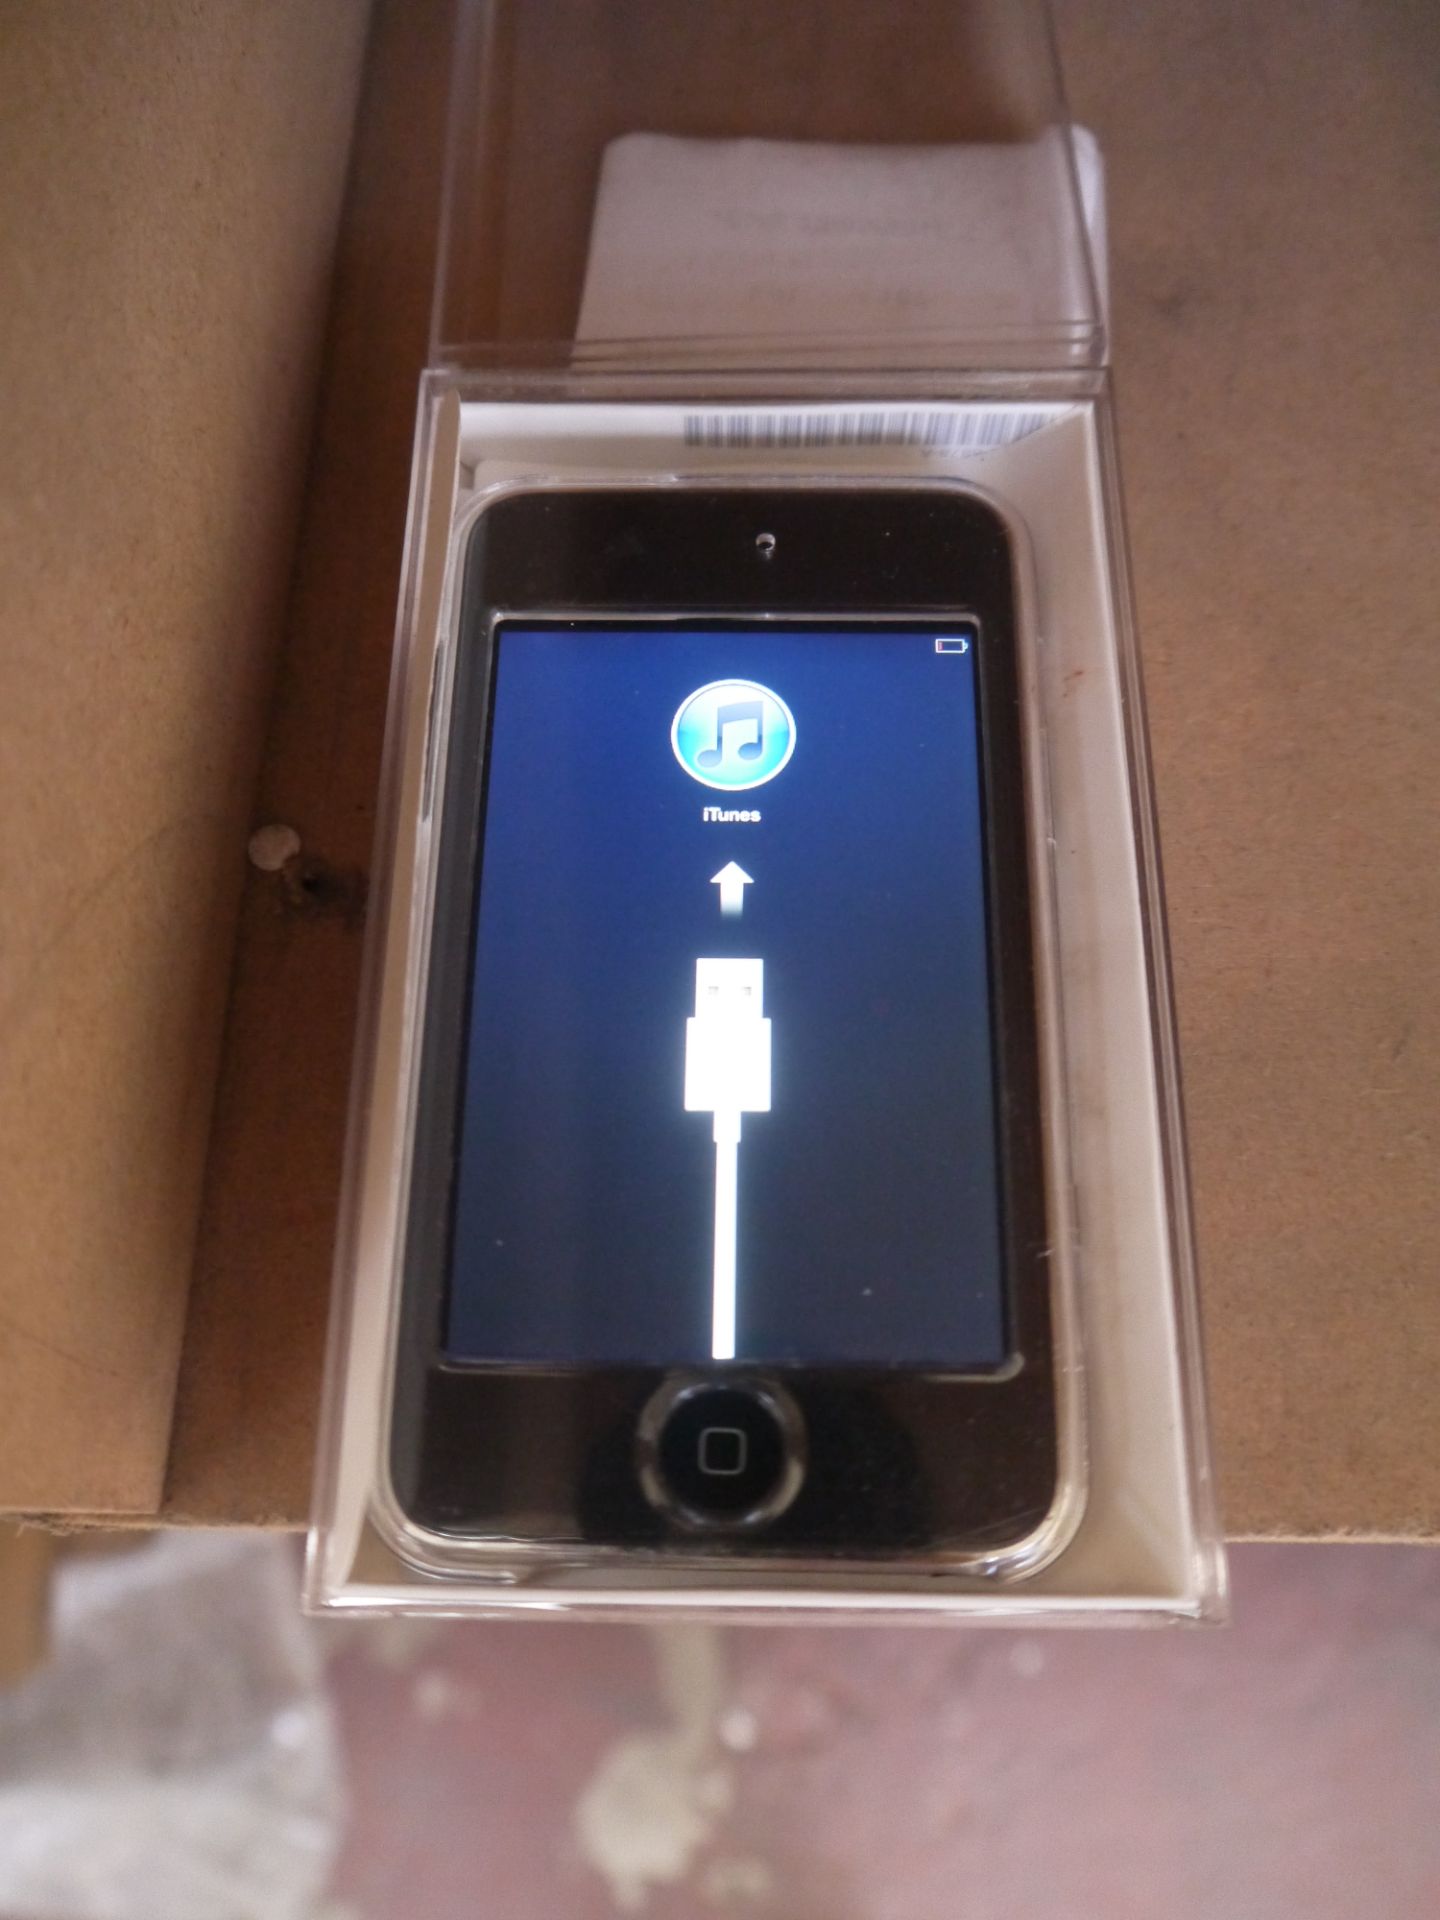 Apple iPod 8GB, with protective screen cover and case, working and in original case but no